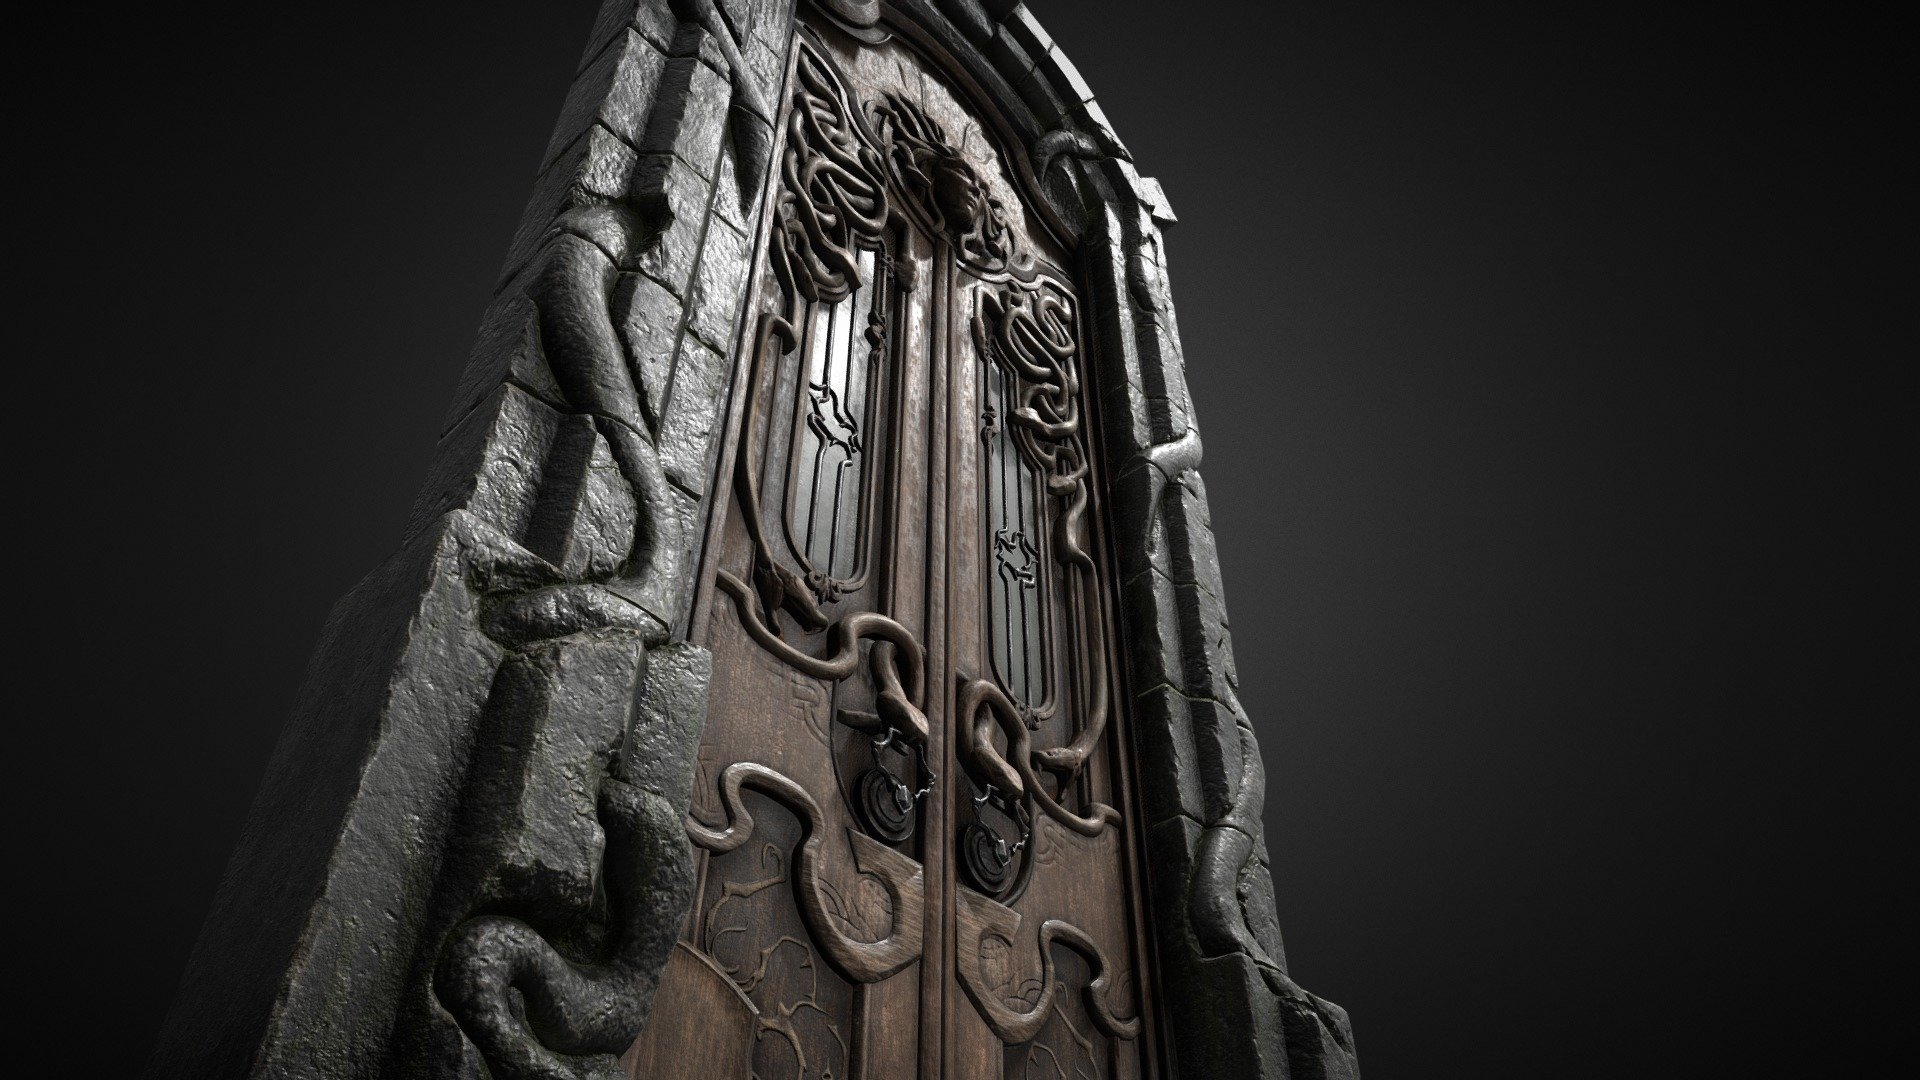 Door design from reference. which I was doing in my free time. model is a bit heavy but for the purposes of the game, it would be possible to optimize it. model on 3 materials, designed so that you could get many variants of the mesh.

workflow
-Blender
-Zbrush
-Substance Painter 

refs. https://www.artstation.com/artwork/zAAa5D - Snake door - 3D model by Eques_inferno 3d model